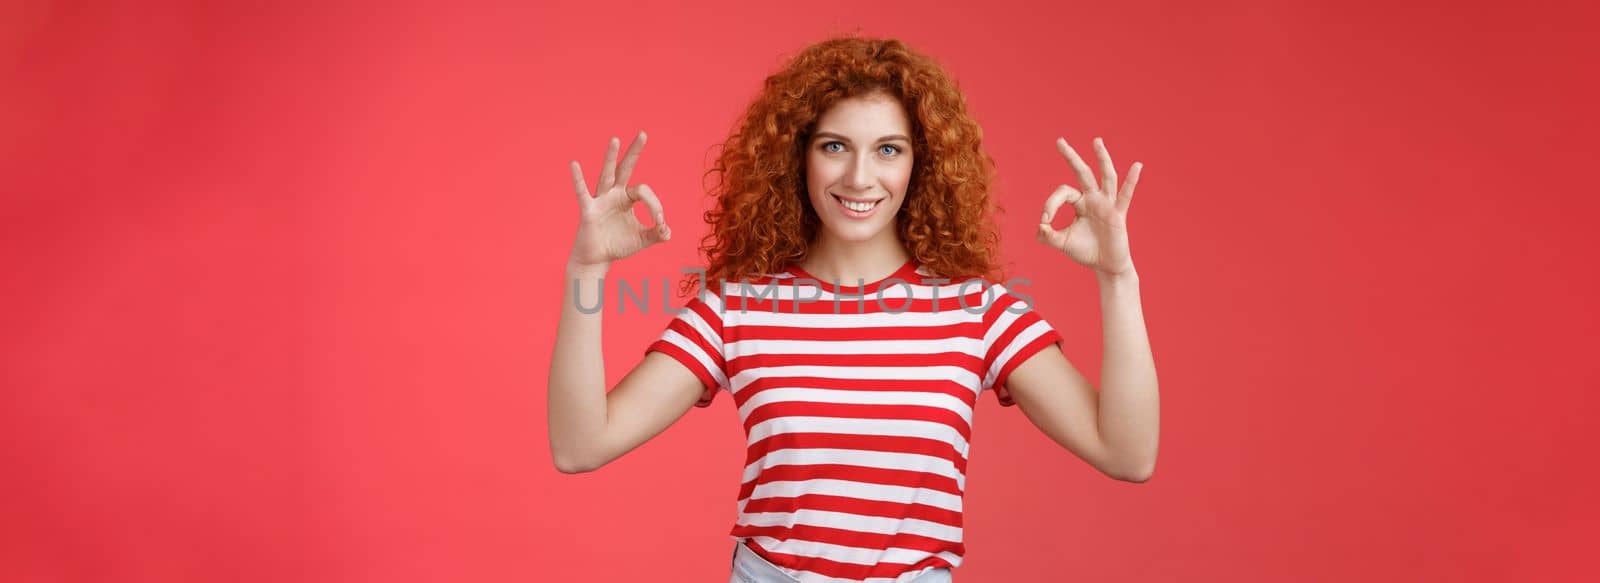 Motivated ambisious good-looking empowered young redhead curly girl assuring everything excellent show okay ok perfection gesture smiling assertive confidently approve like awesome choice.